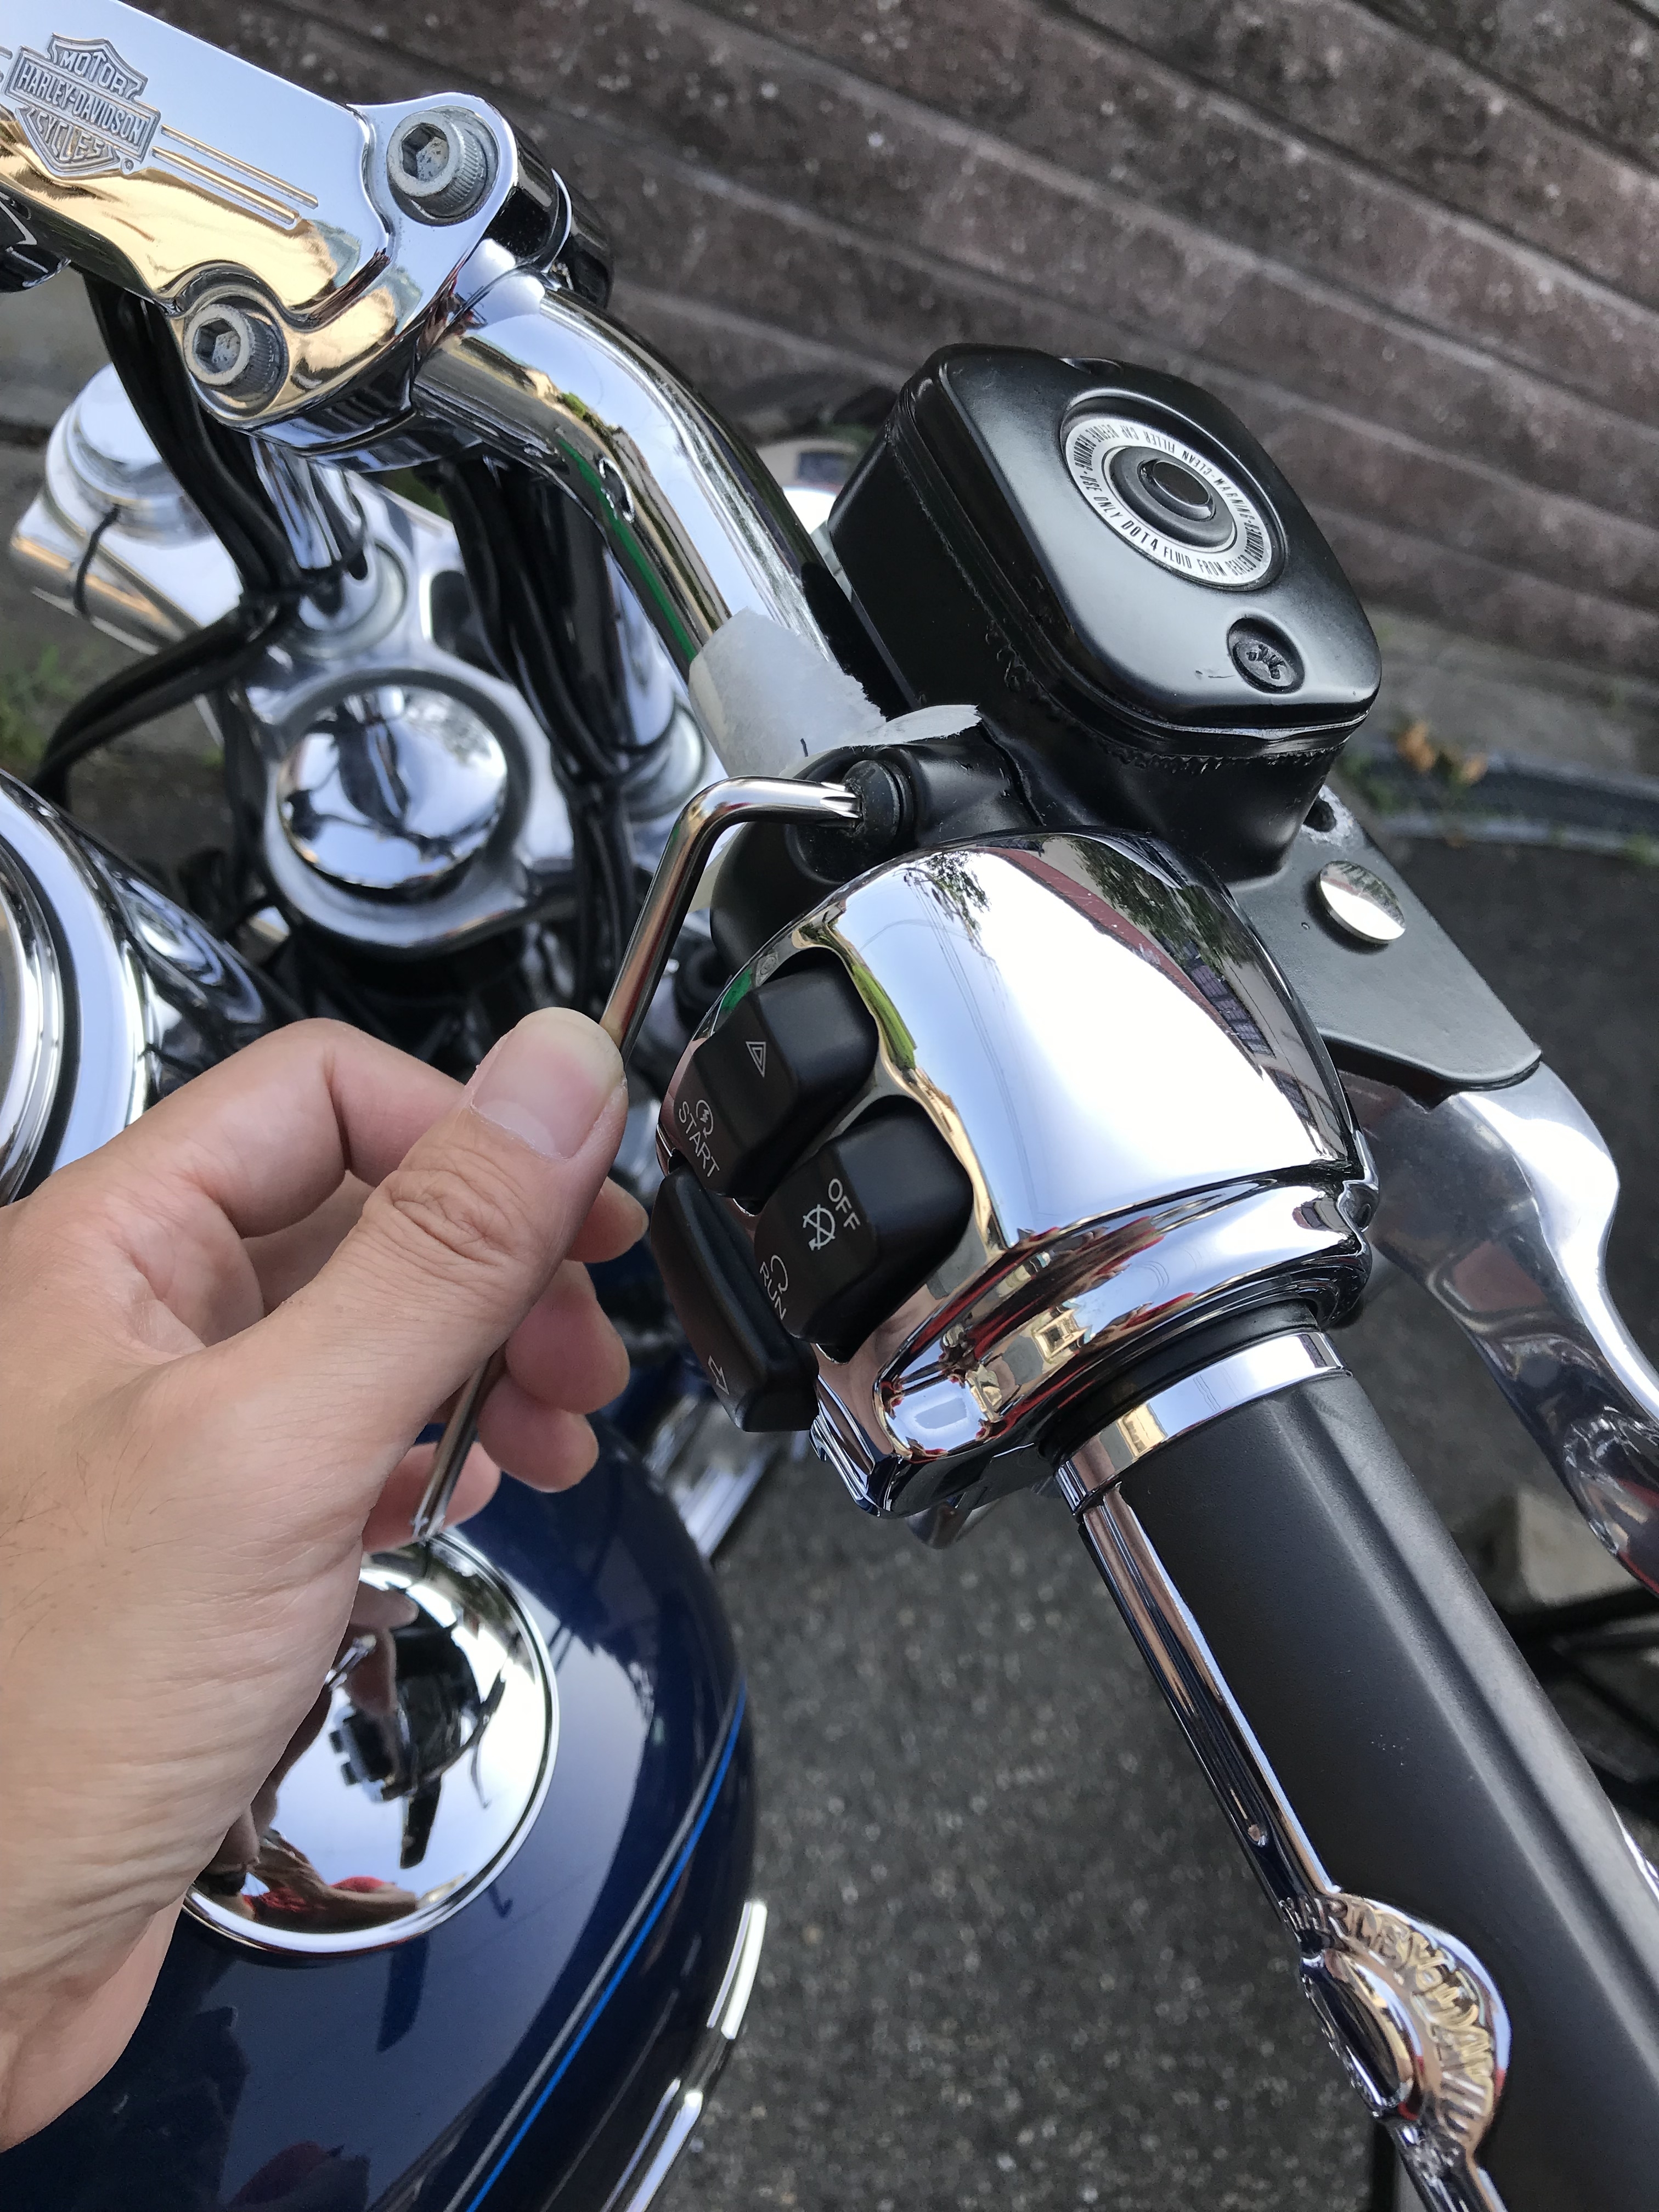 replace-the-lever-of-the-motorcycle-2.jpg